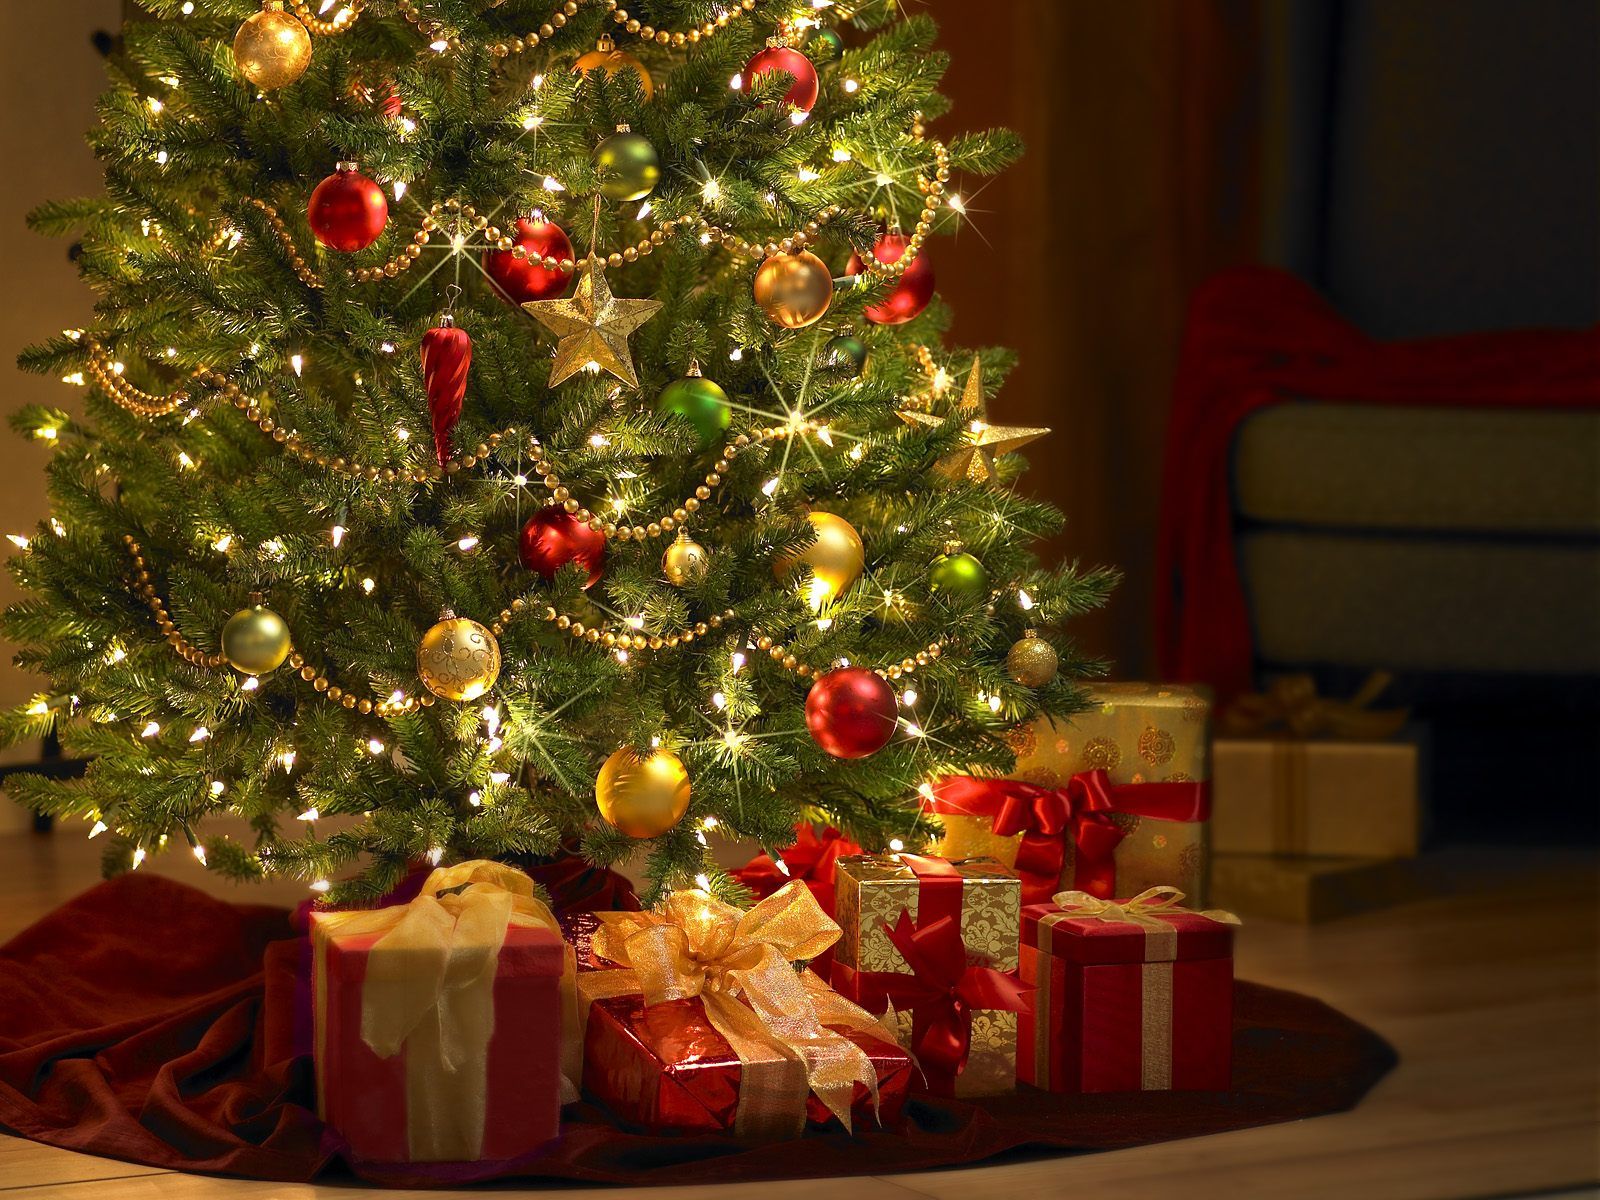 Christmas Tree and Presents Wallpaper, High Definition, High Resolution HD Wallpaper